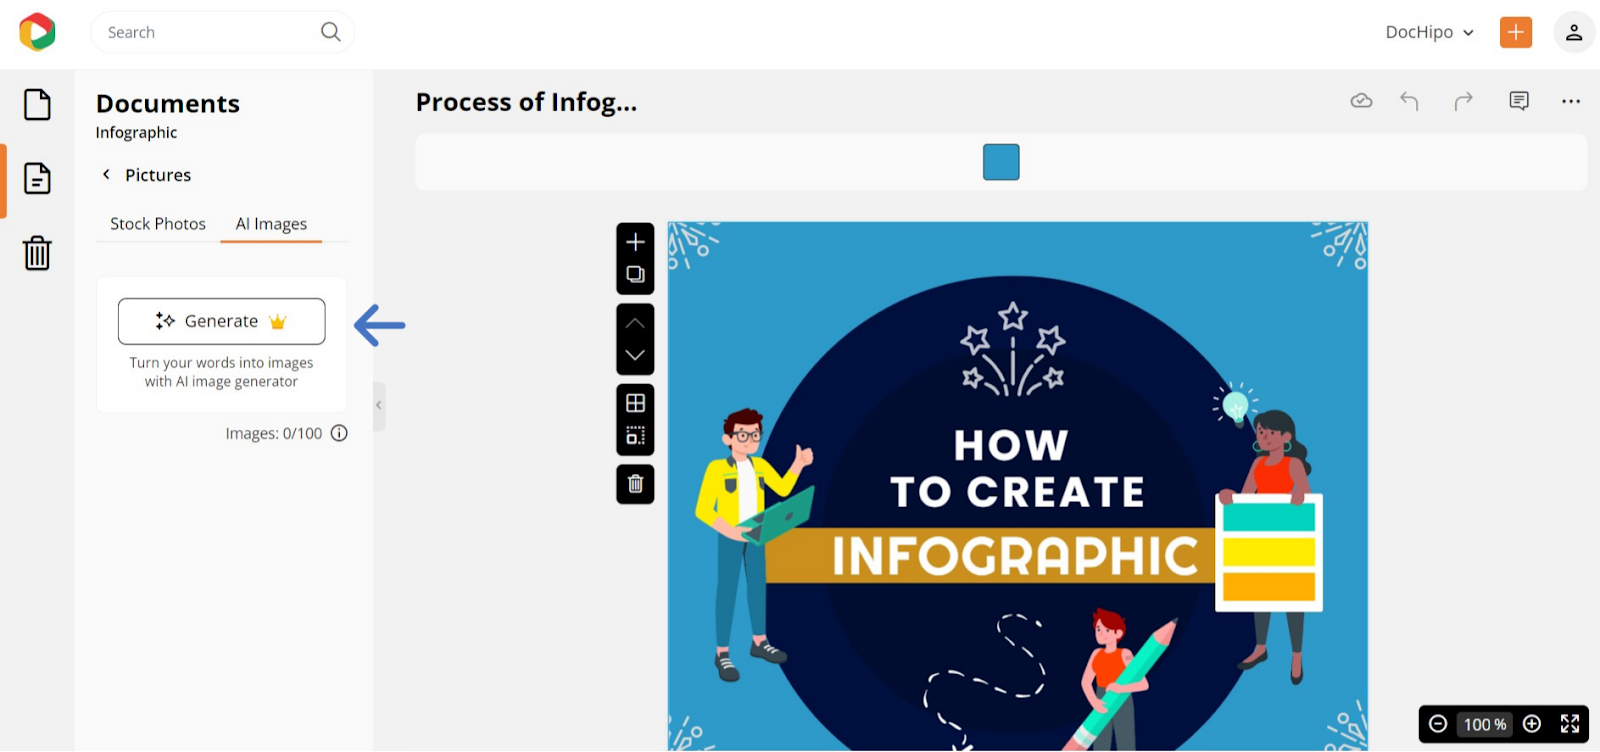 Generate AI Images with DocHipo for infographics